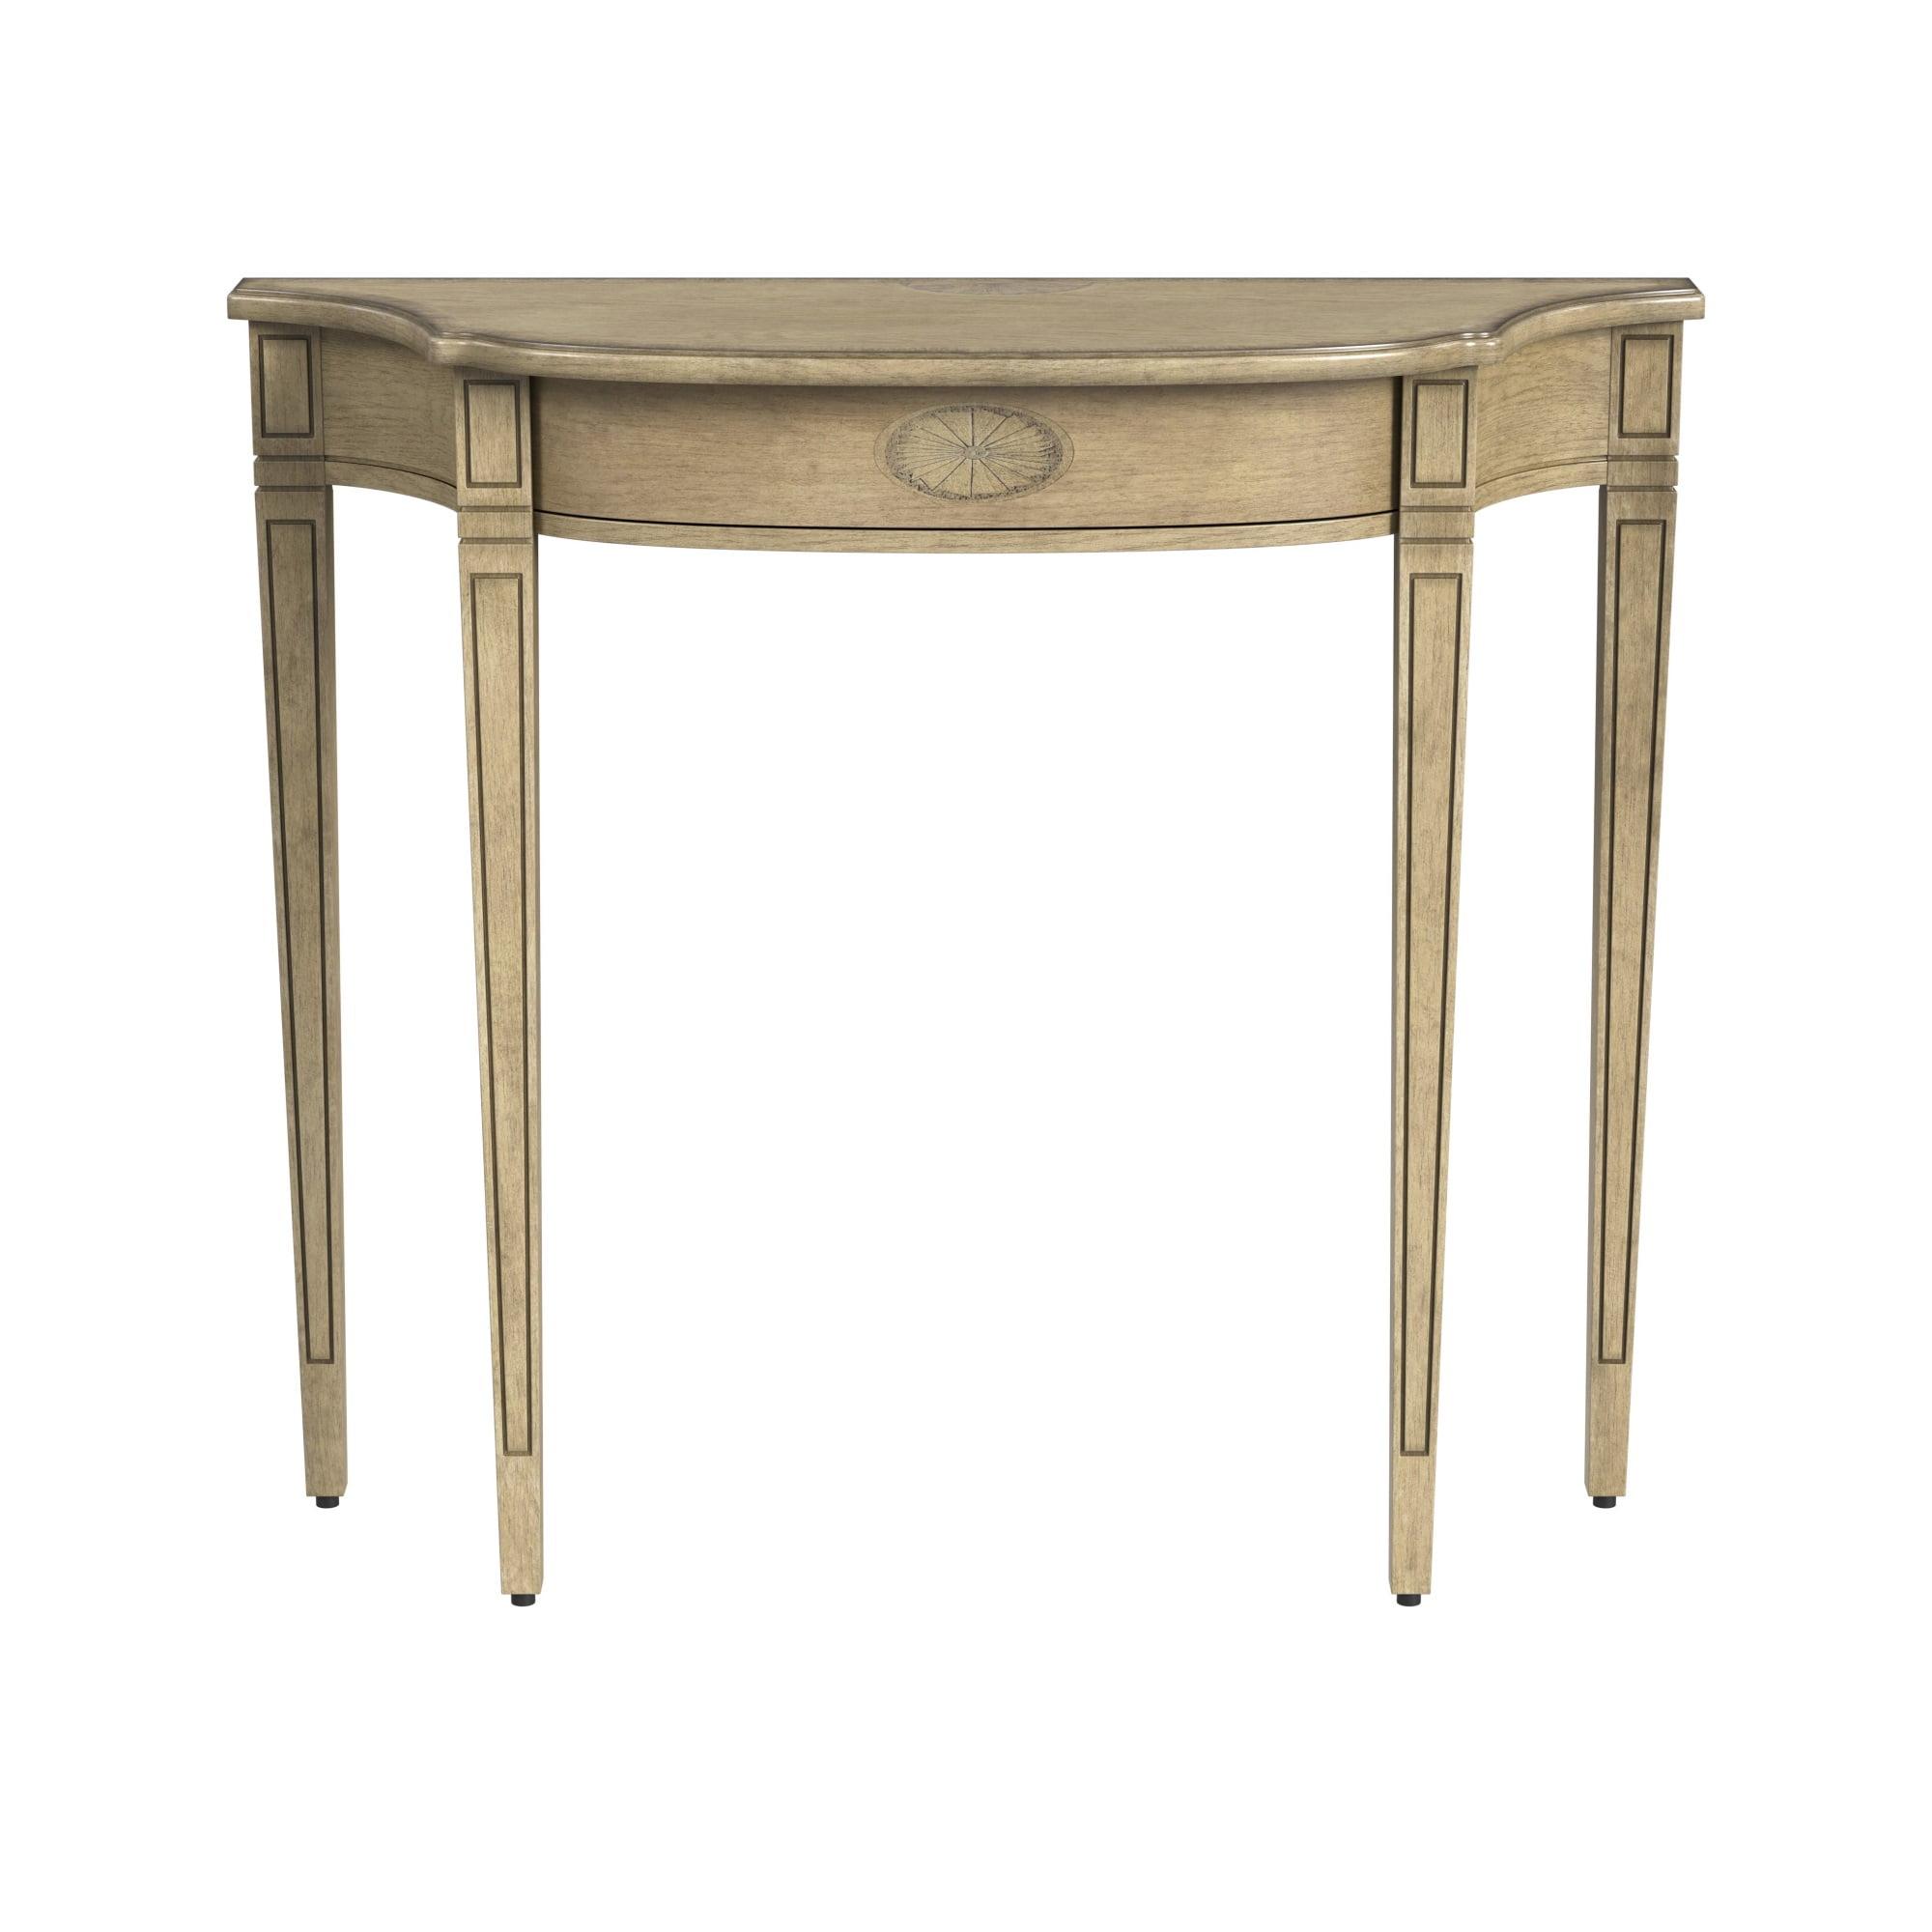 Beige Transitional Demilune Wood Console Table with Carved Legs